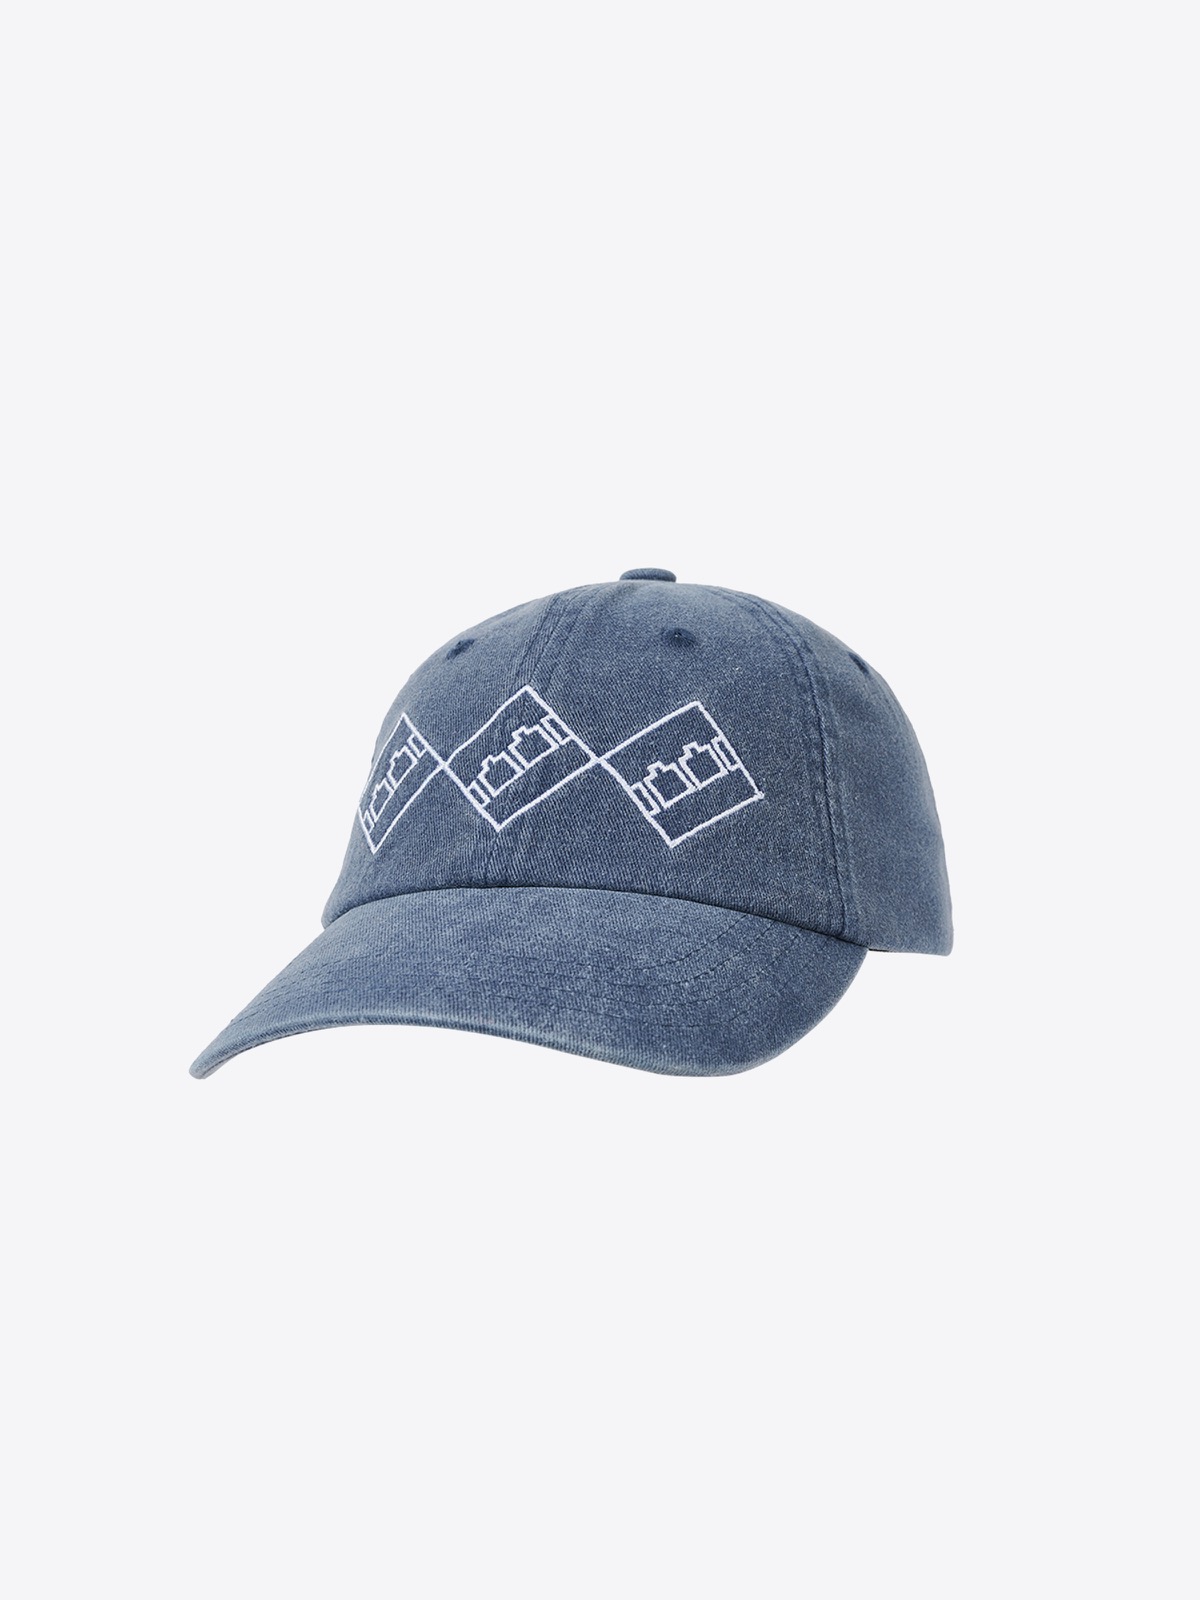 the trilogy tapes ttt | diamond cap | washed navy